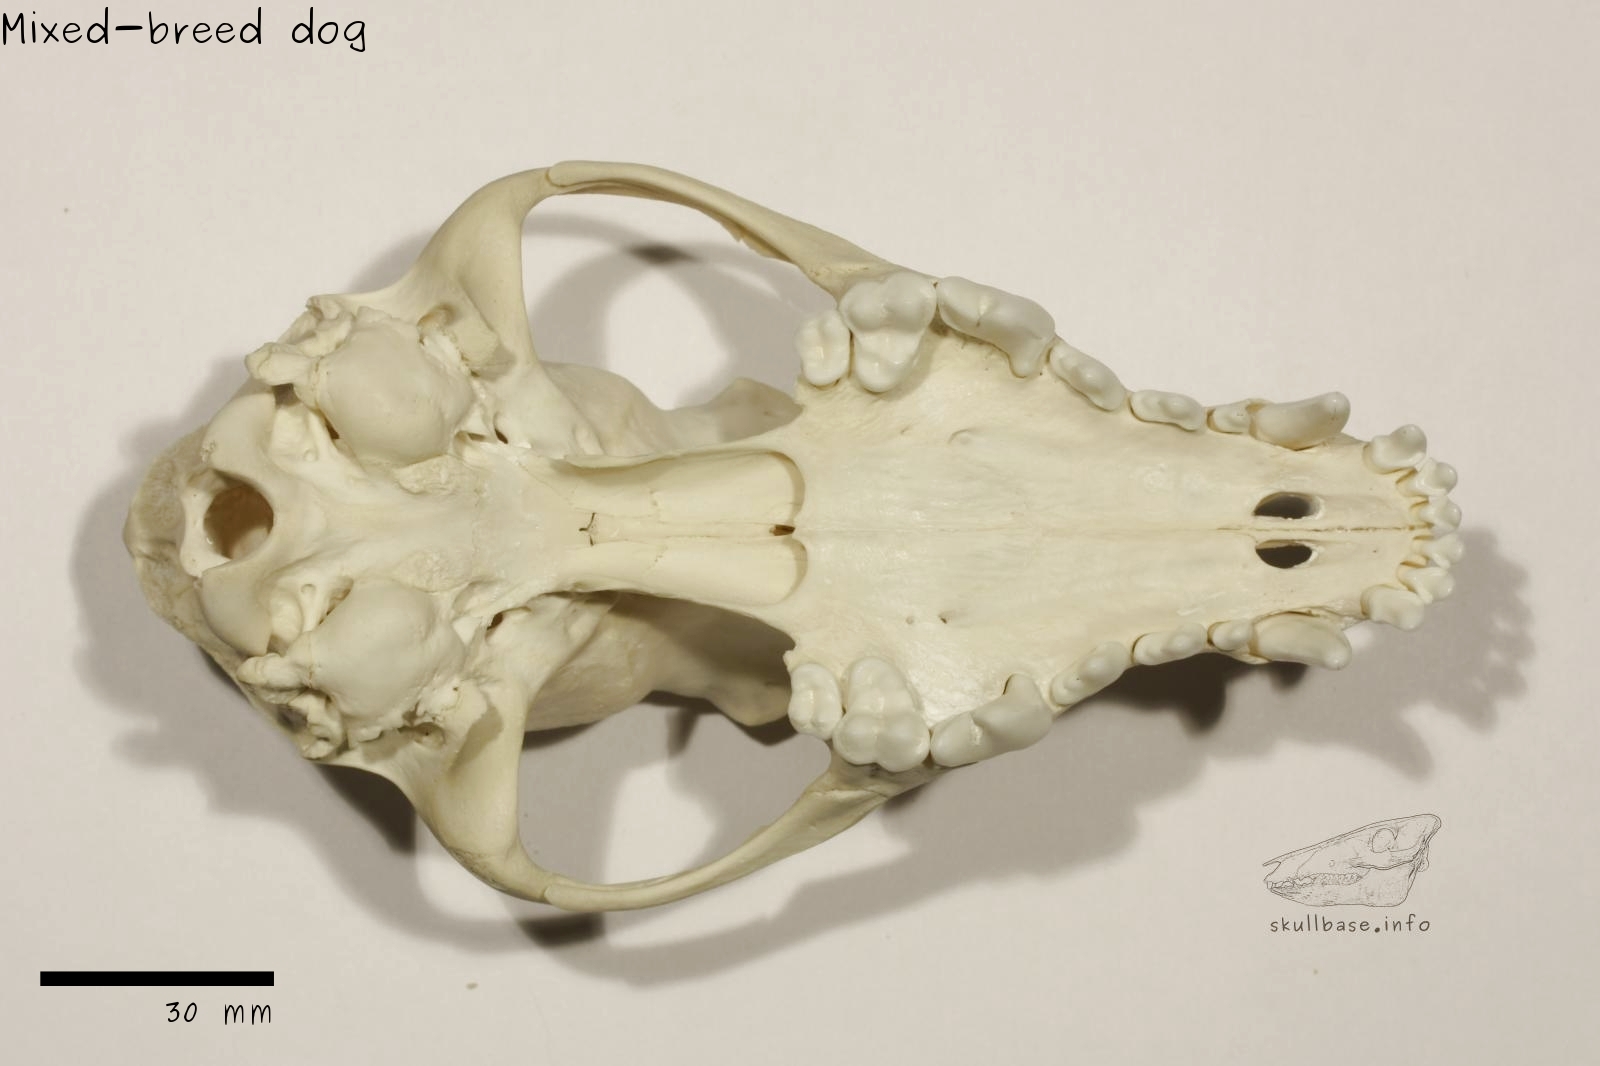 Mixed-breed dog (Canis lupus familiaris) skull ventral view